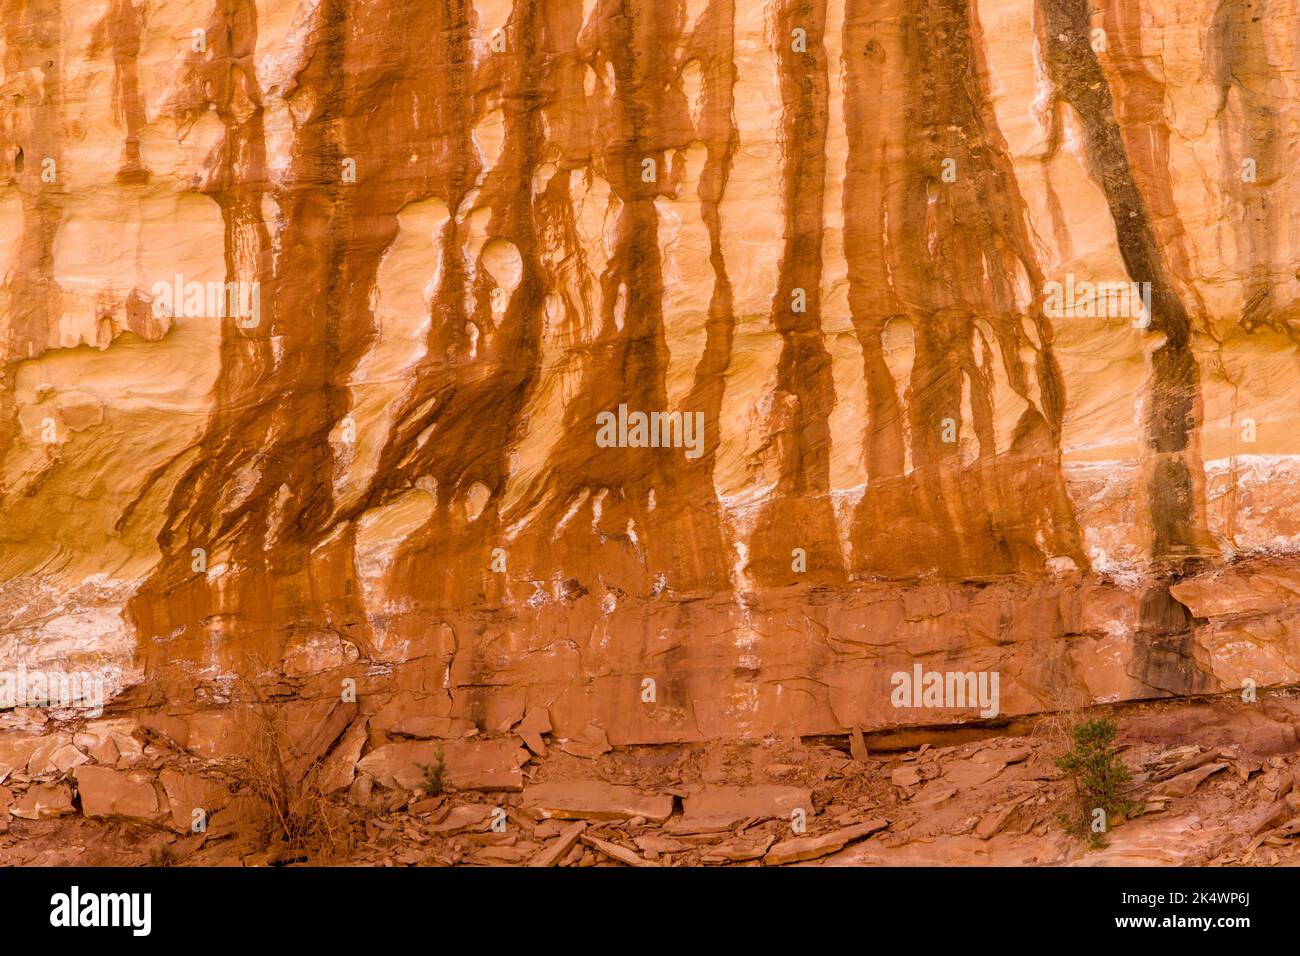 Colorful stripes of desert varnish mineral deposits on the sandstone wall of Horse Canyon, Needles District, Canyonlands NP, Utah. Stock Photo